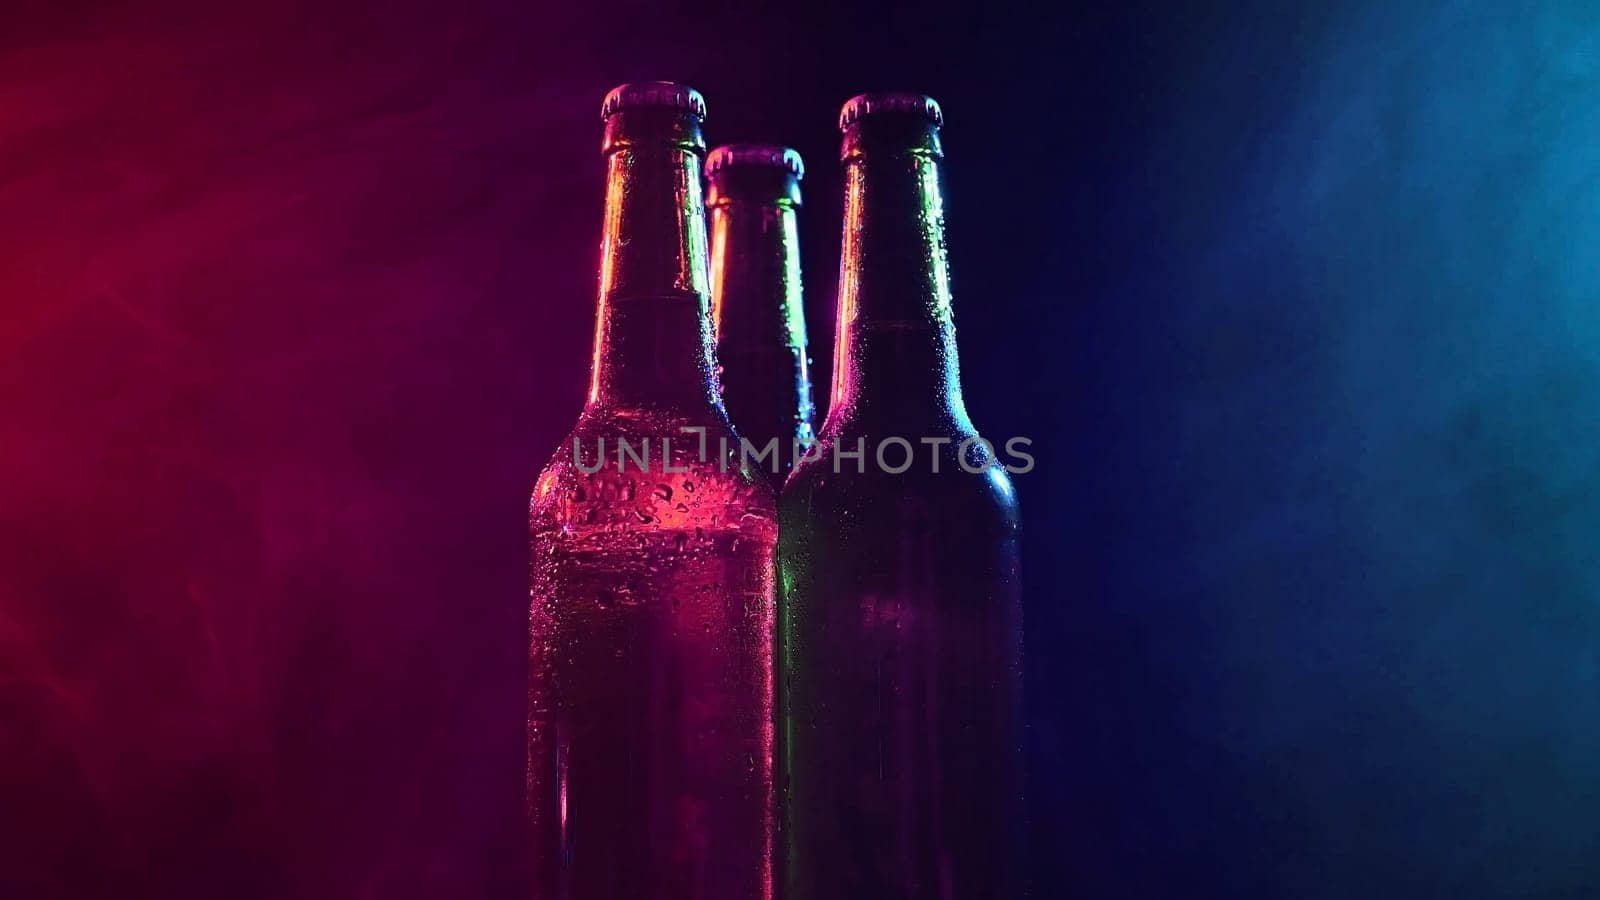 Three bottles of beer spinning in a blue-pink mist